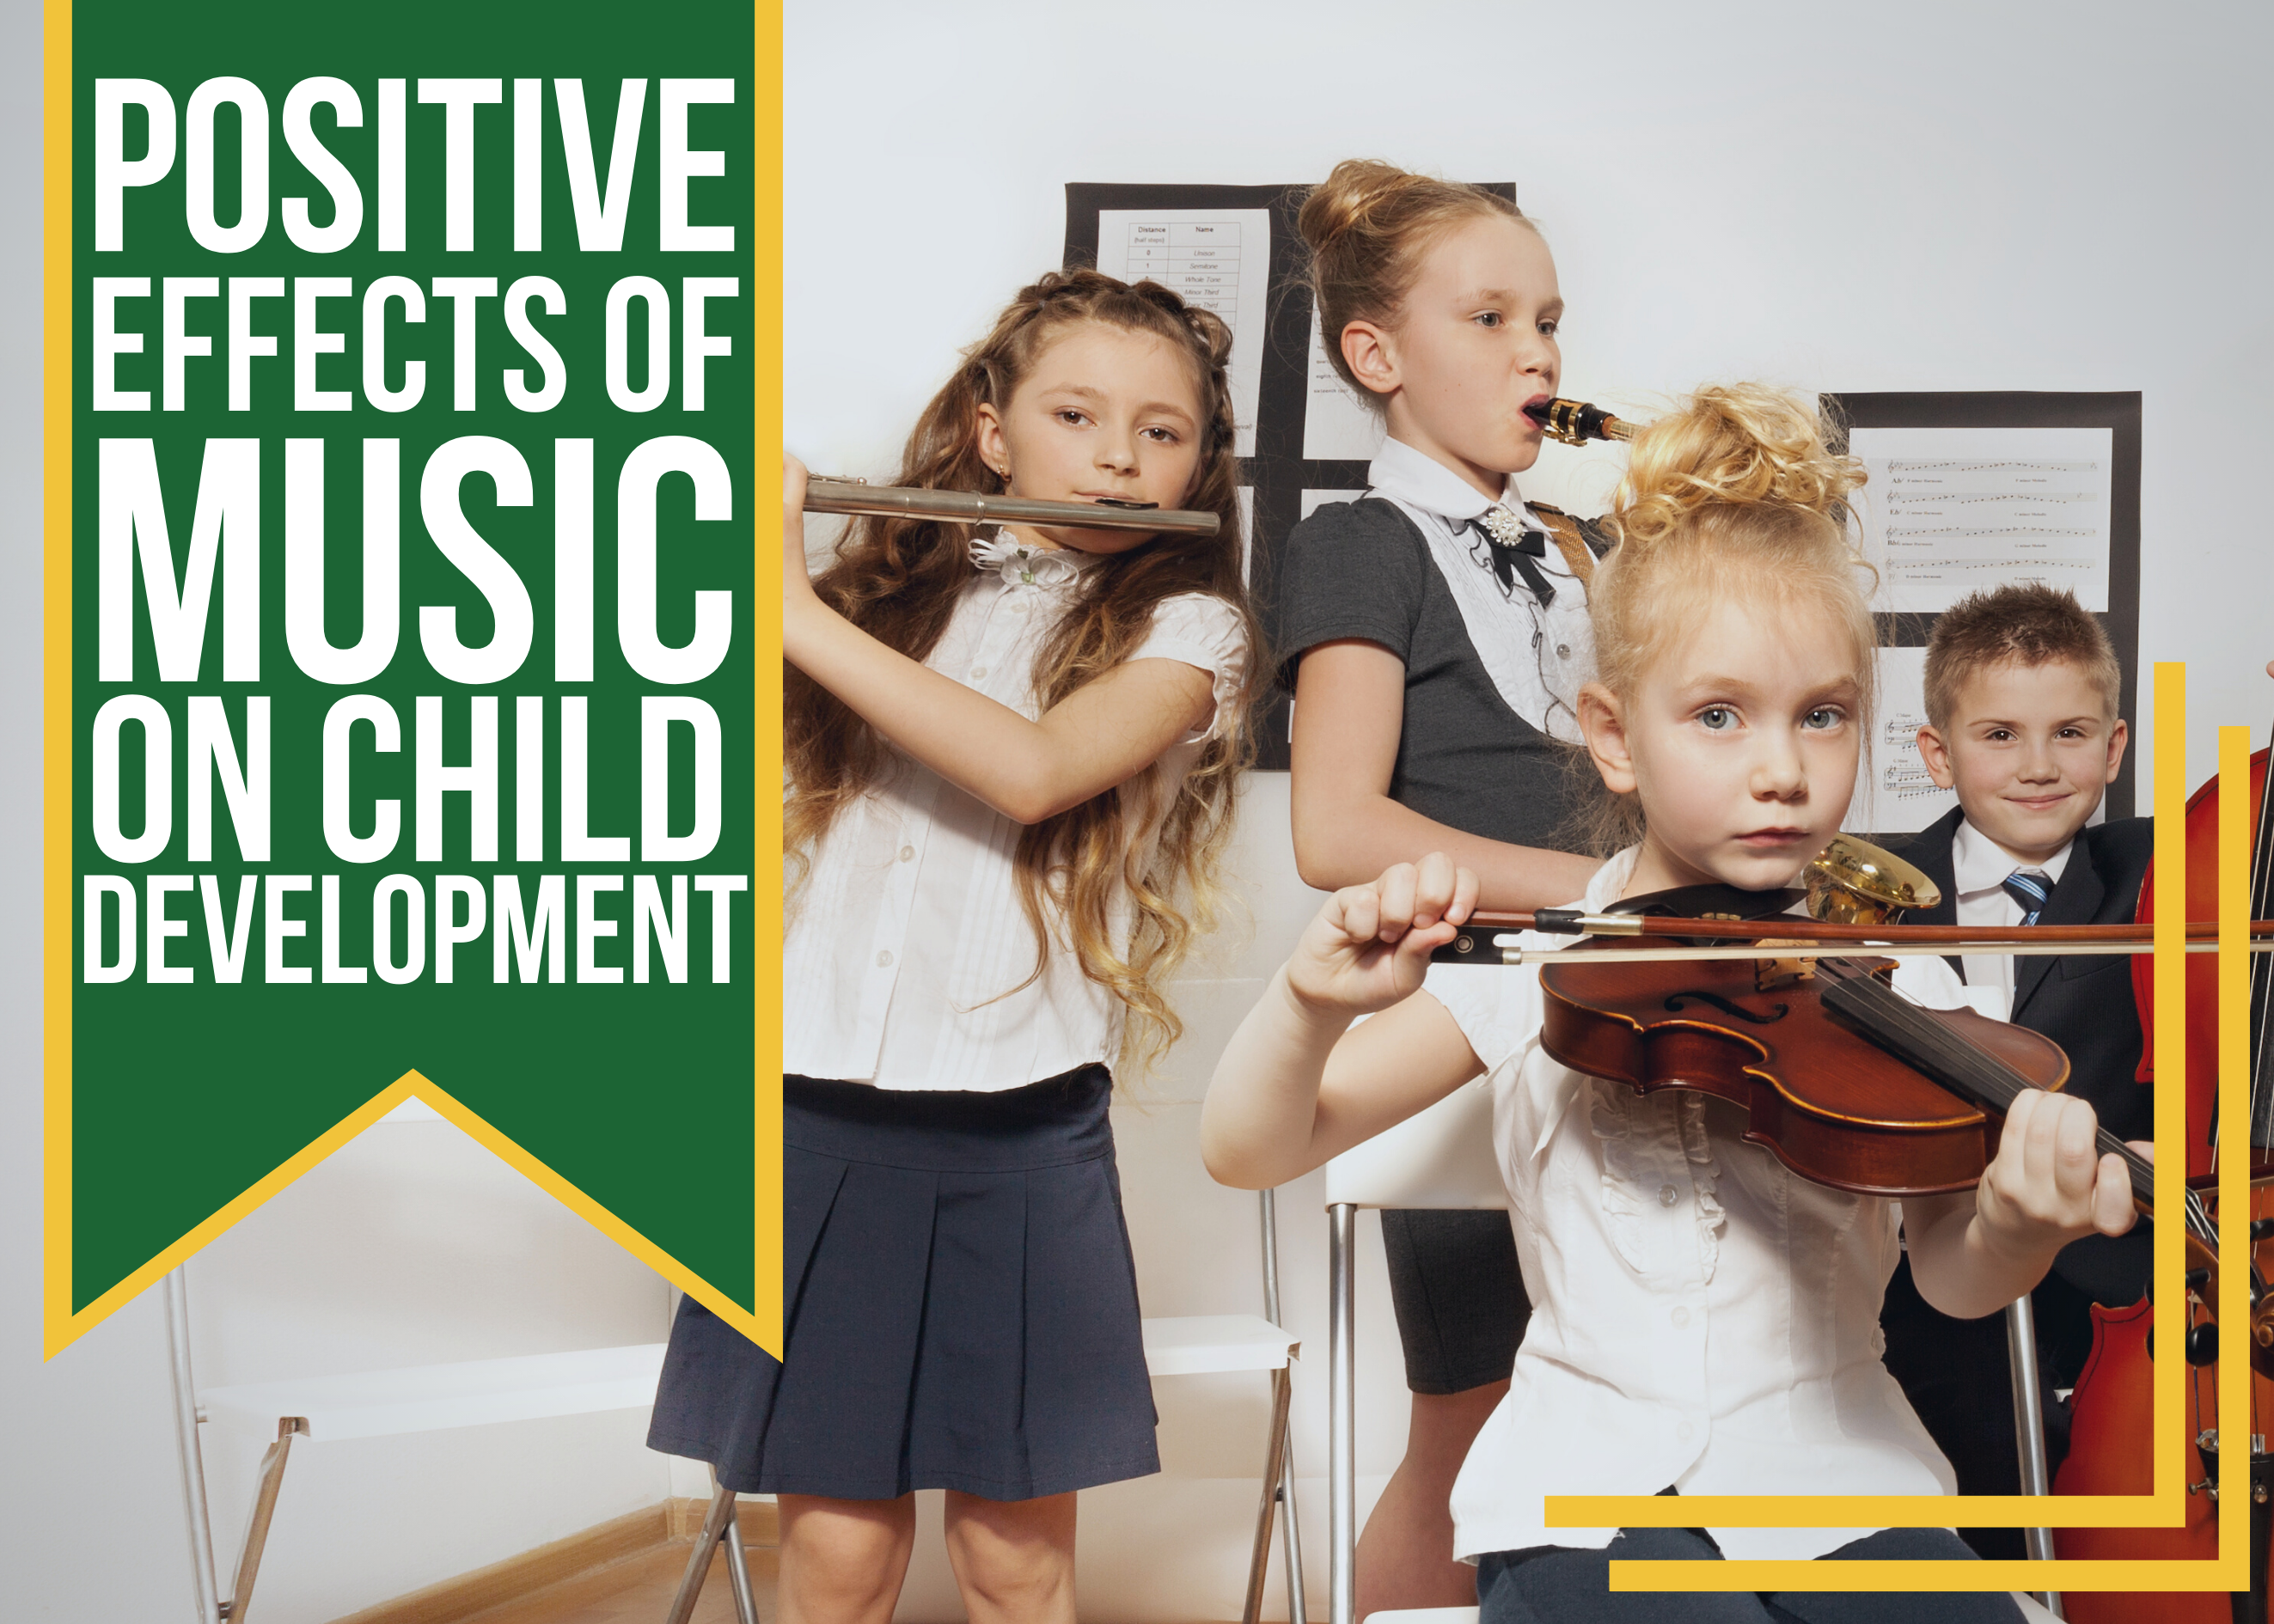 Positive Effects of Music on Child Development